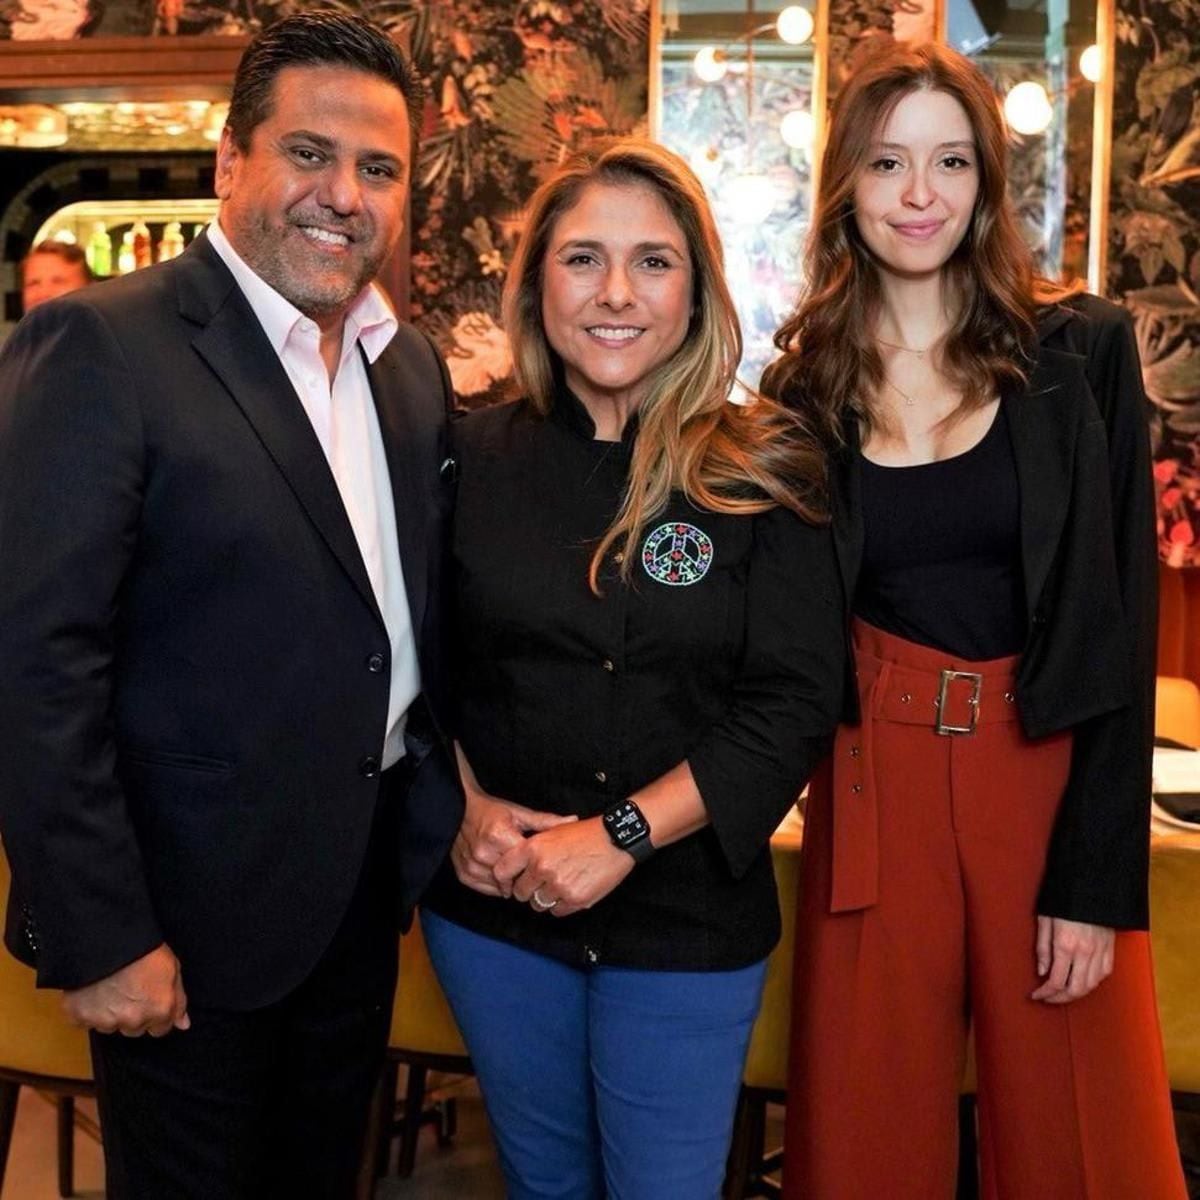 Chef Lorena Garcia celebrates the launch of a brain cancer research project to honor her brother